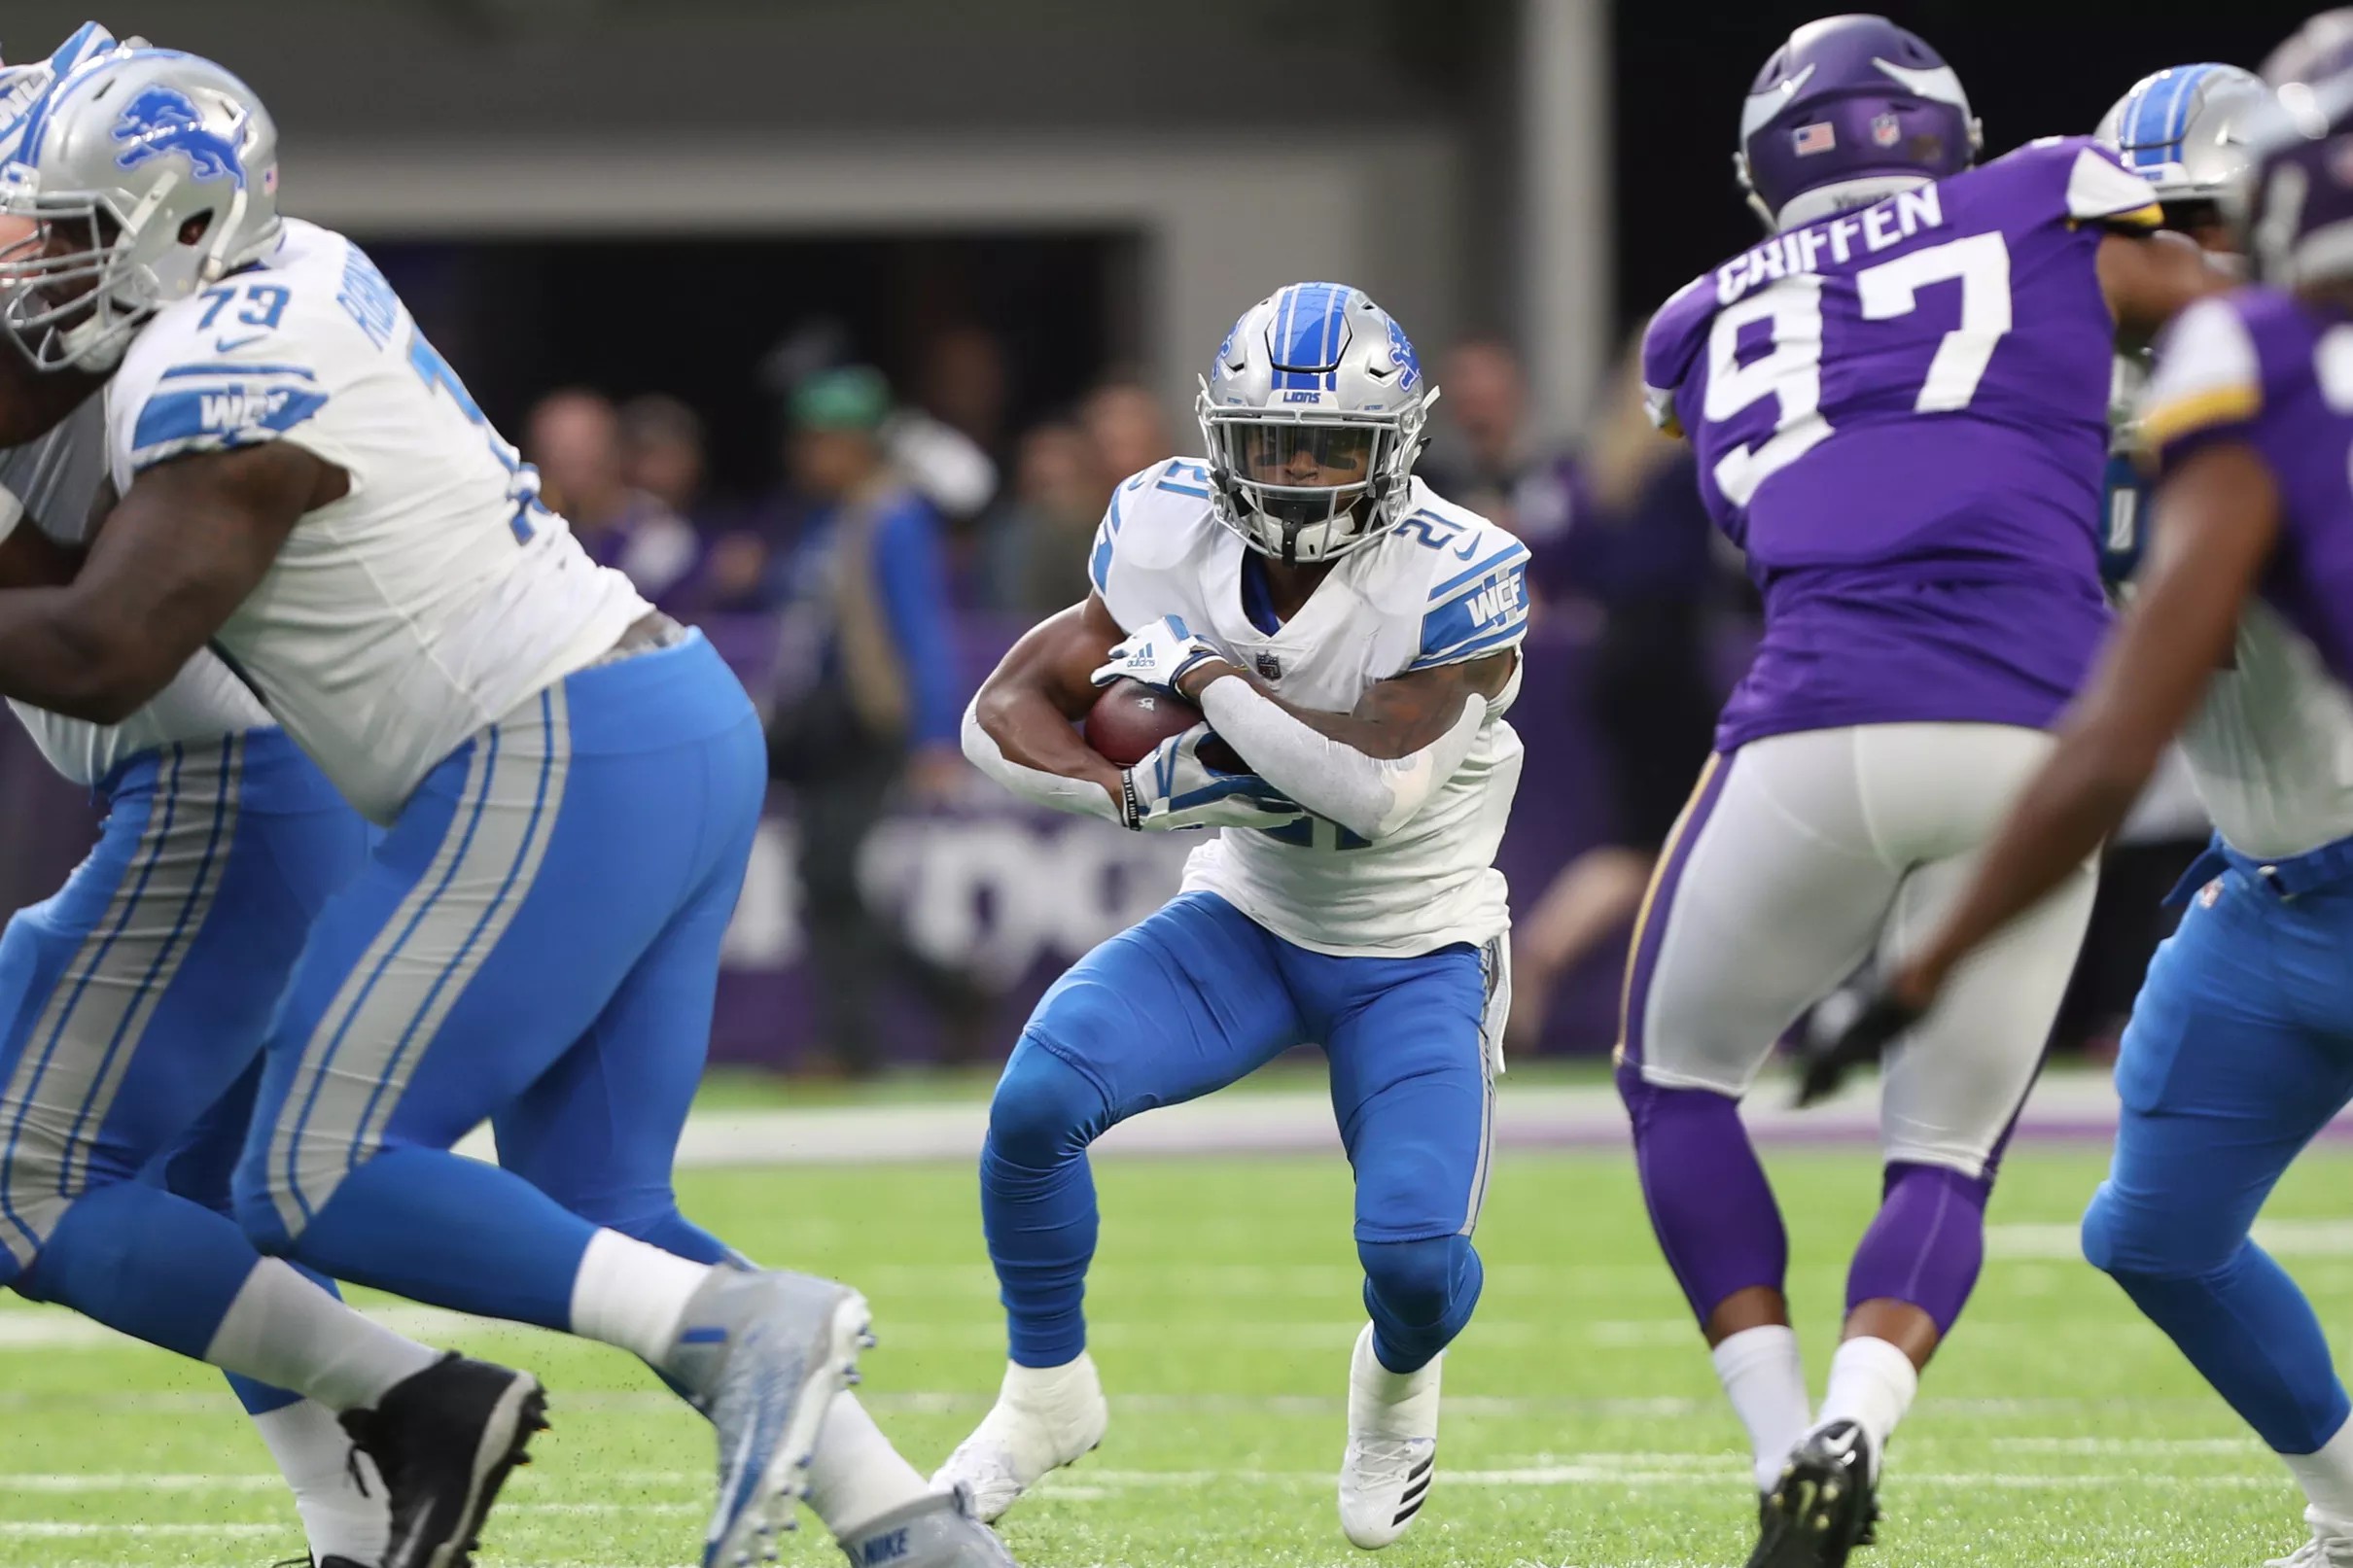 LISTEN Dan Miller’s calls from the Lions victory over the Vikings